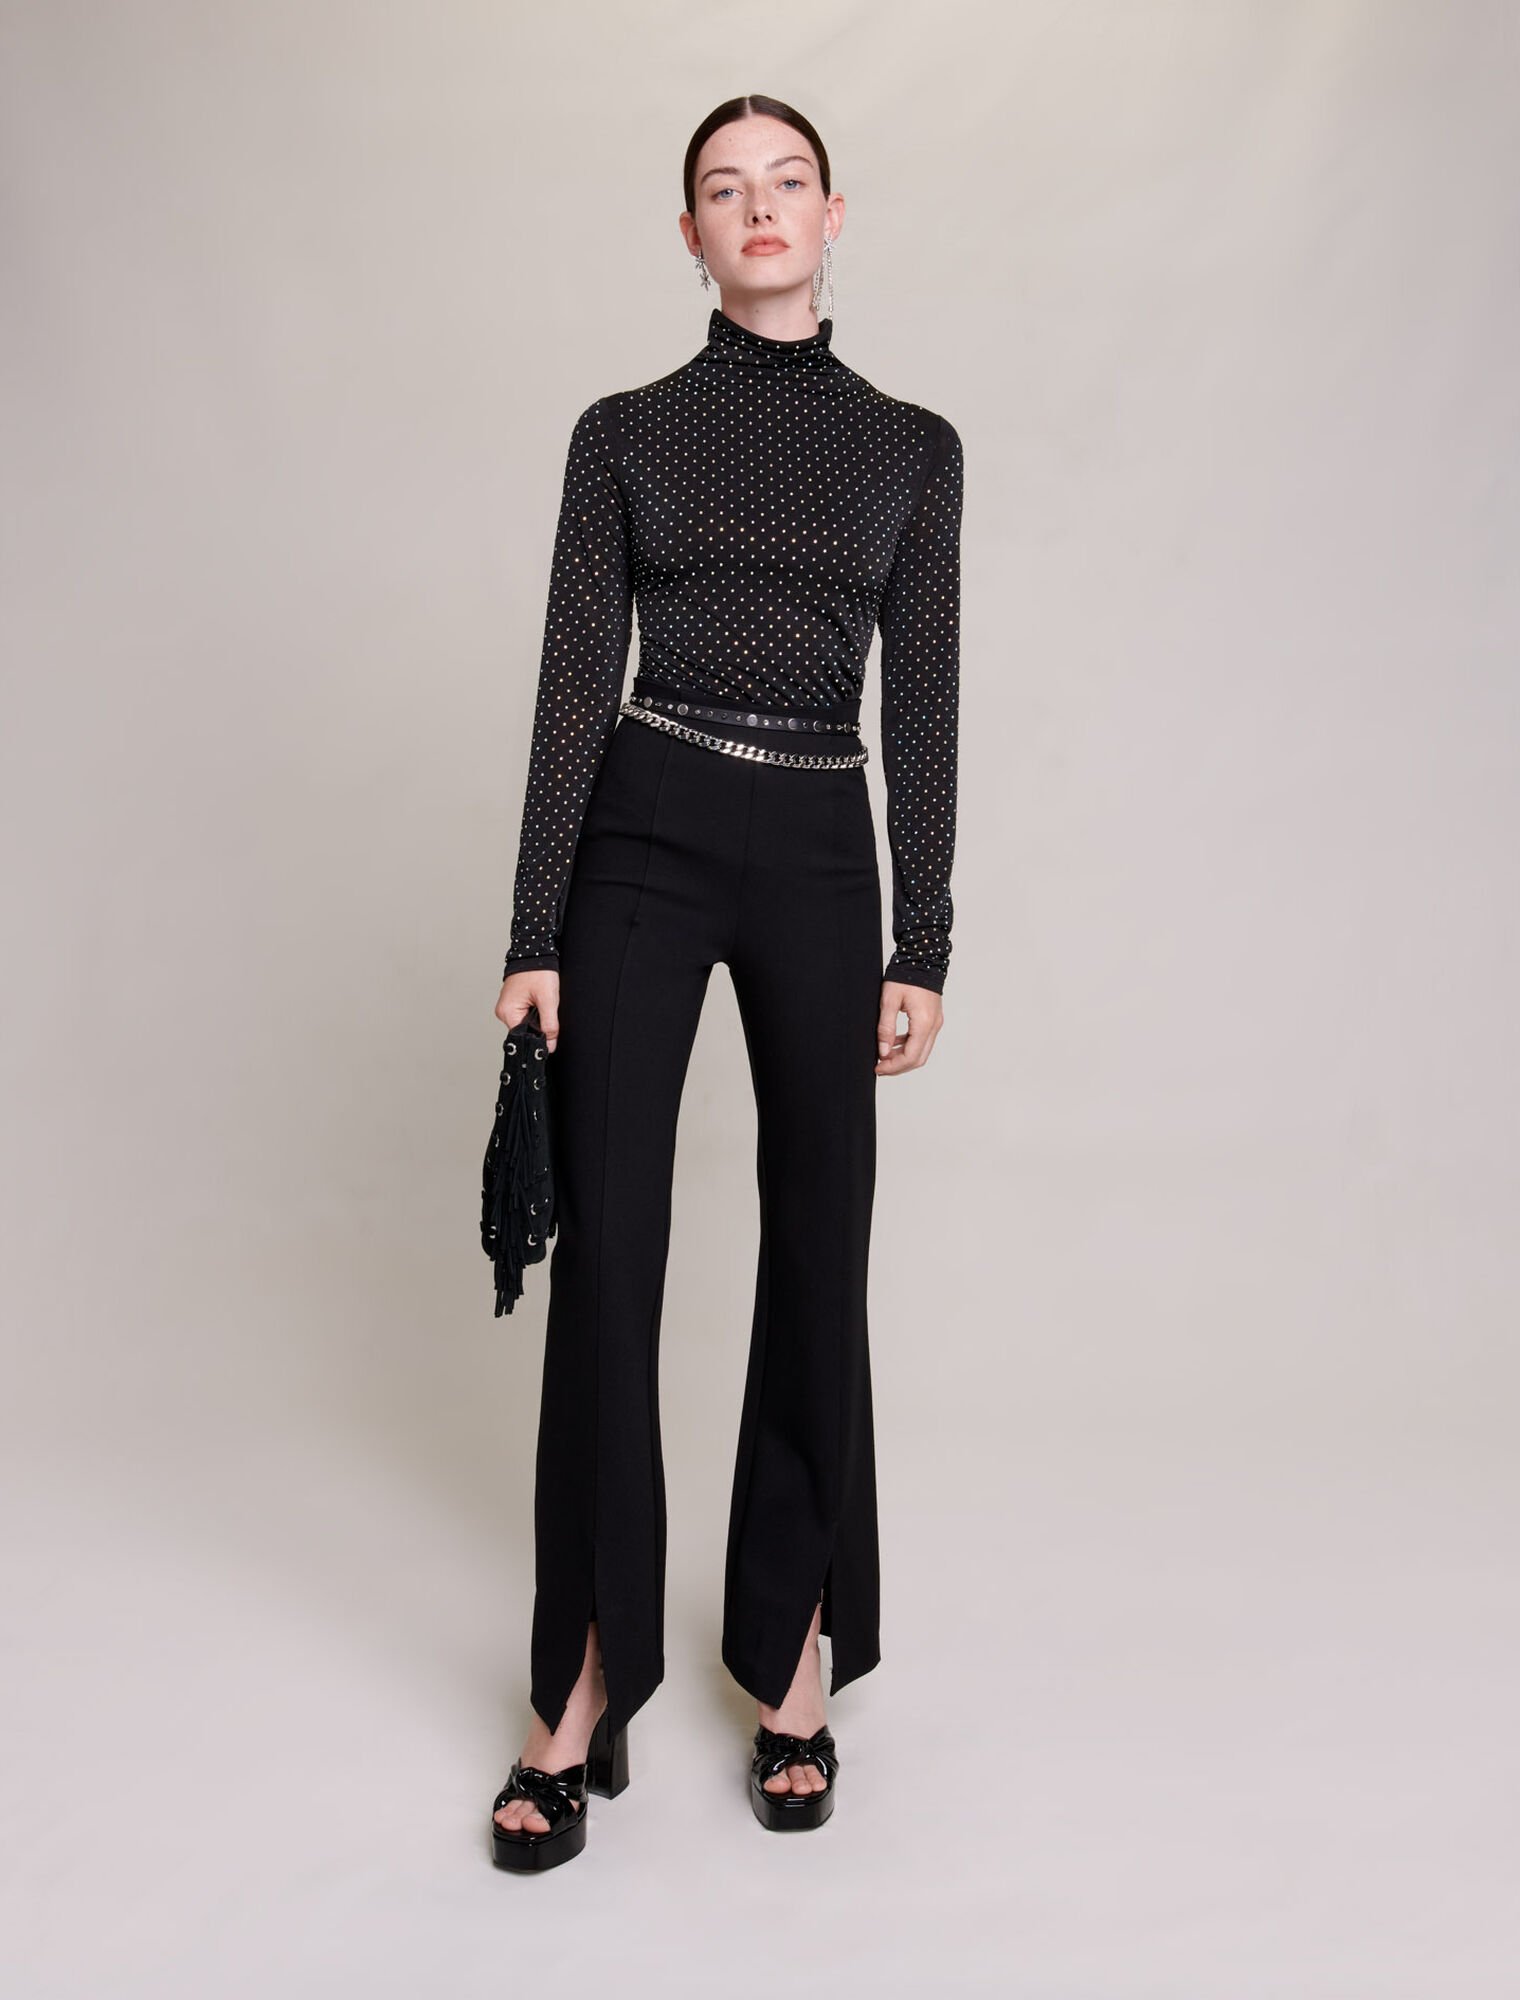 Black slim-fit trousers with slits